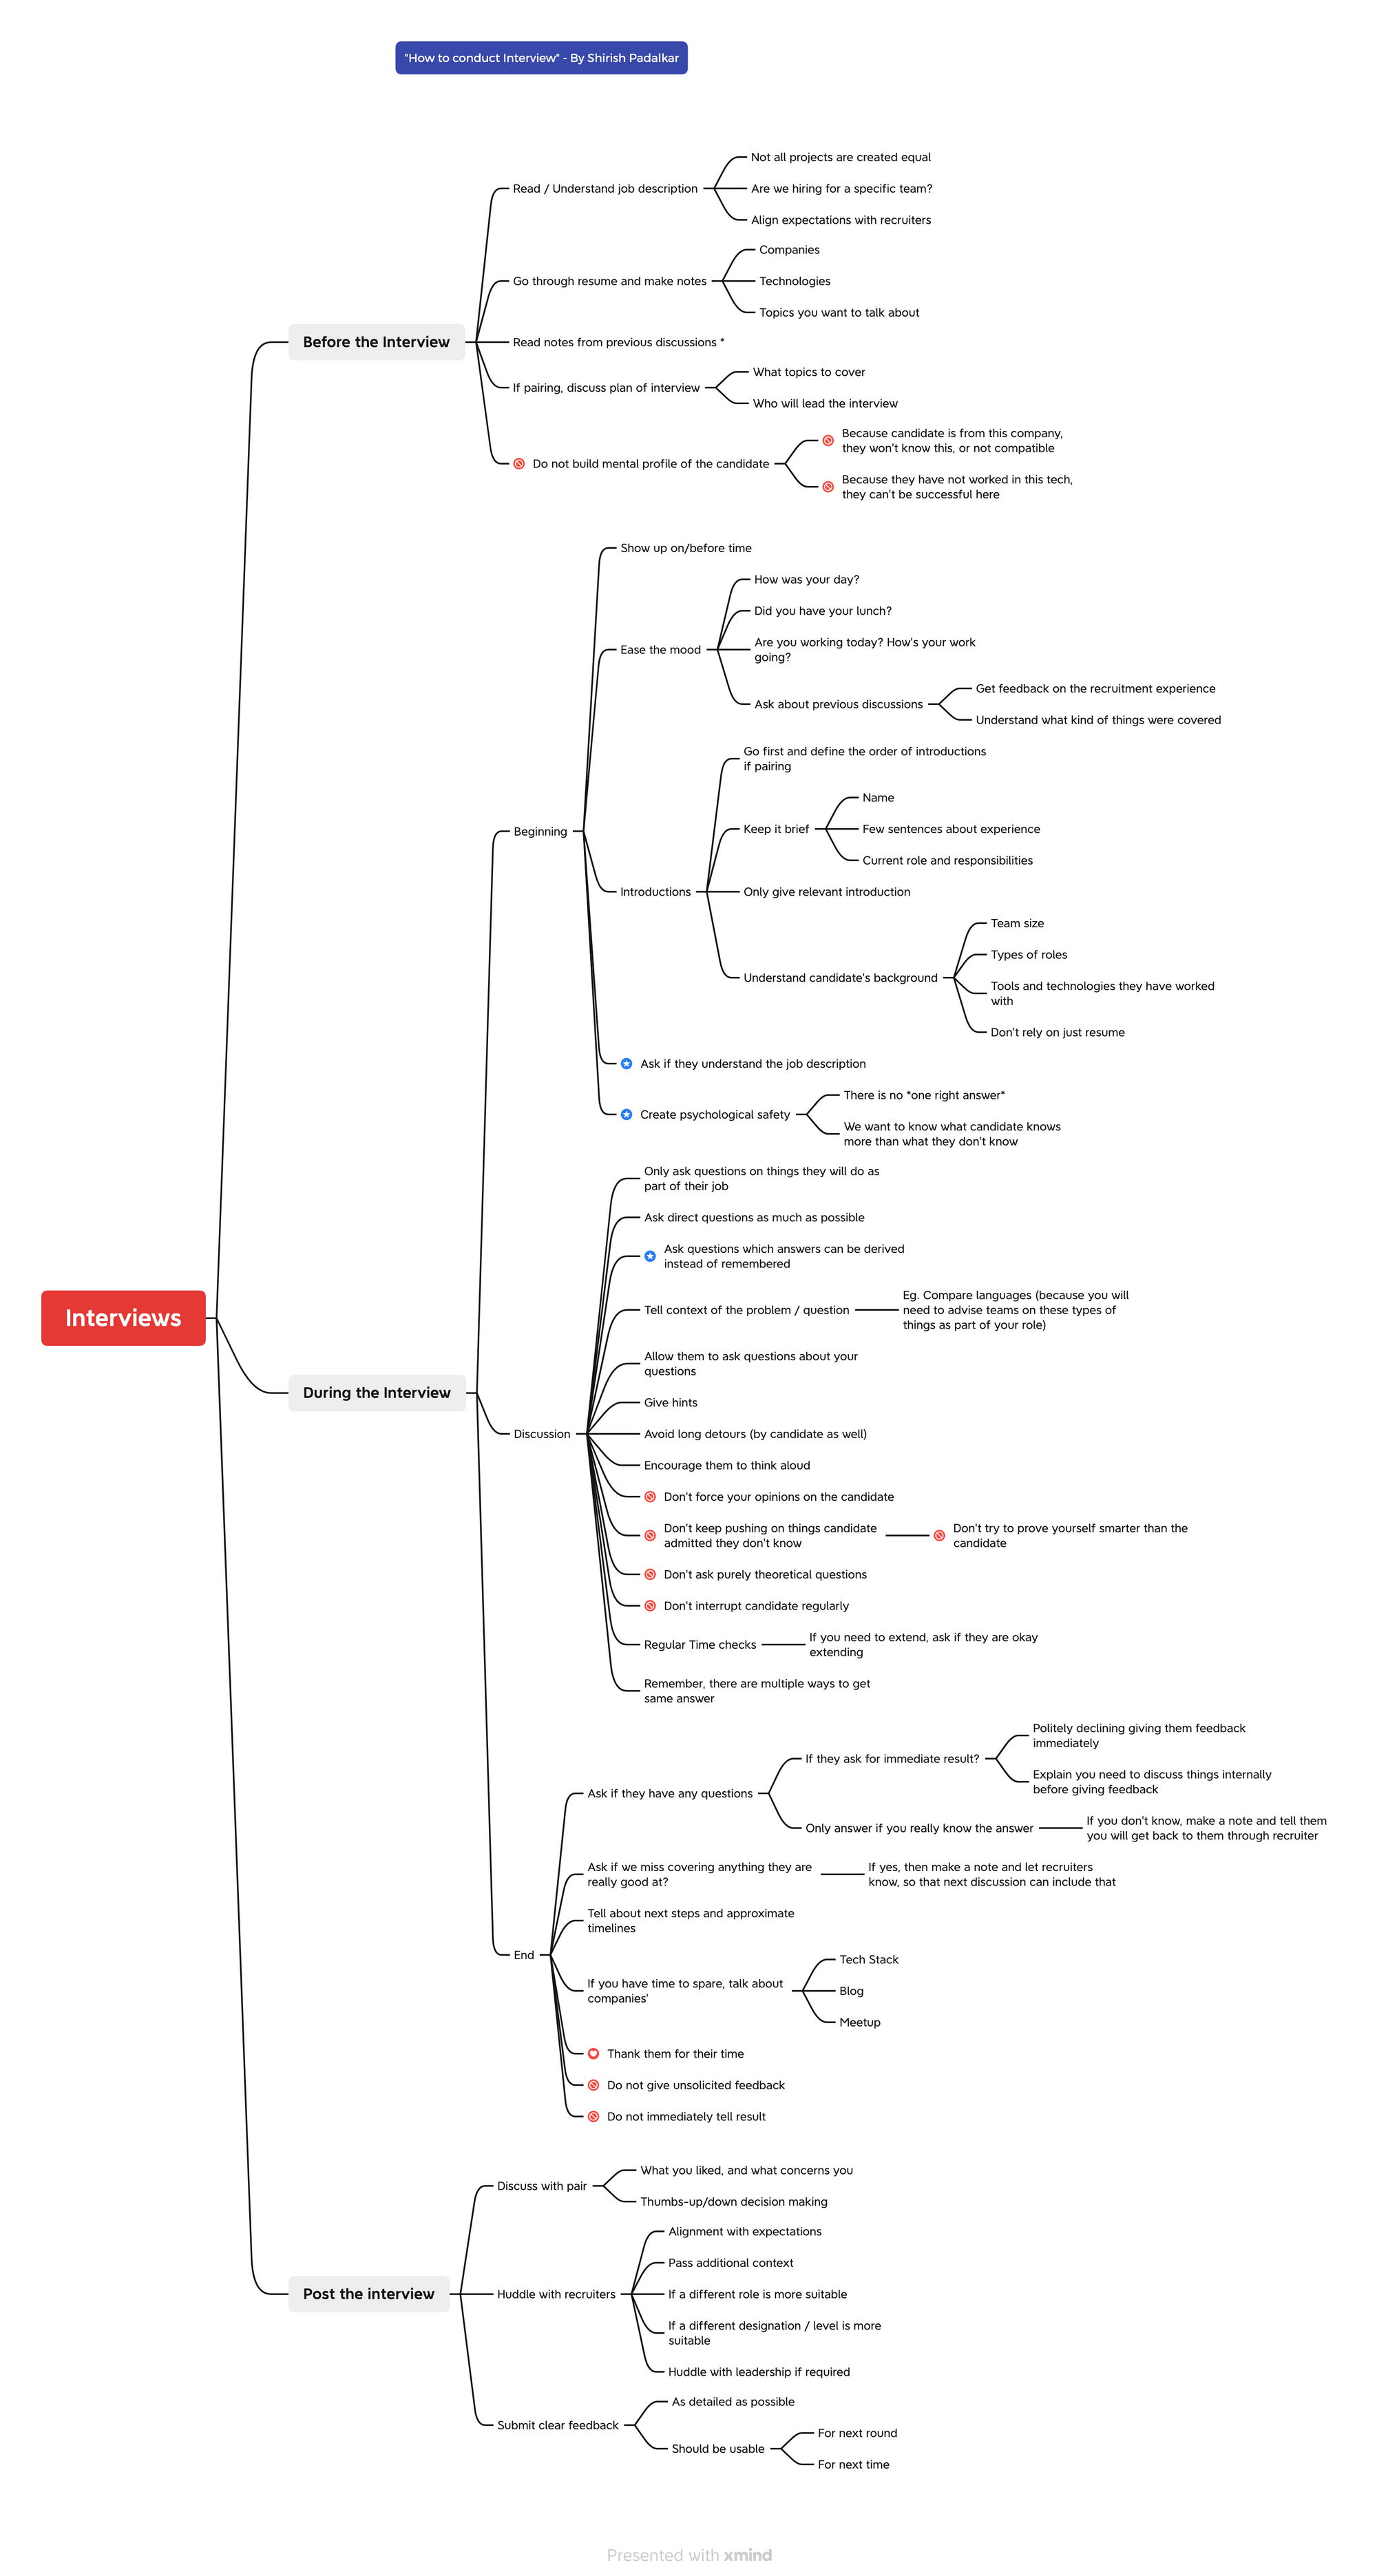 How to conduct Interview: A MindMap Guide for Interviewers